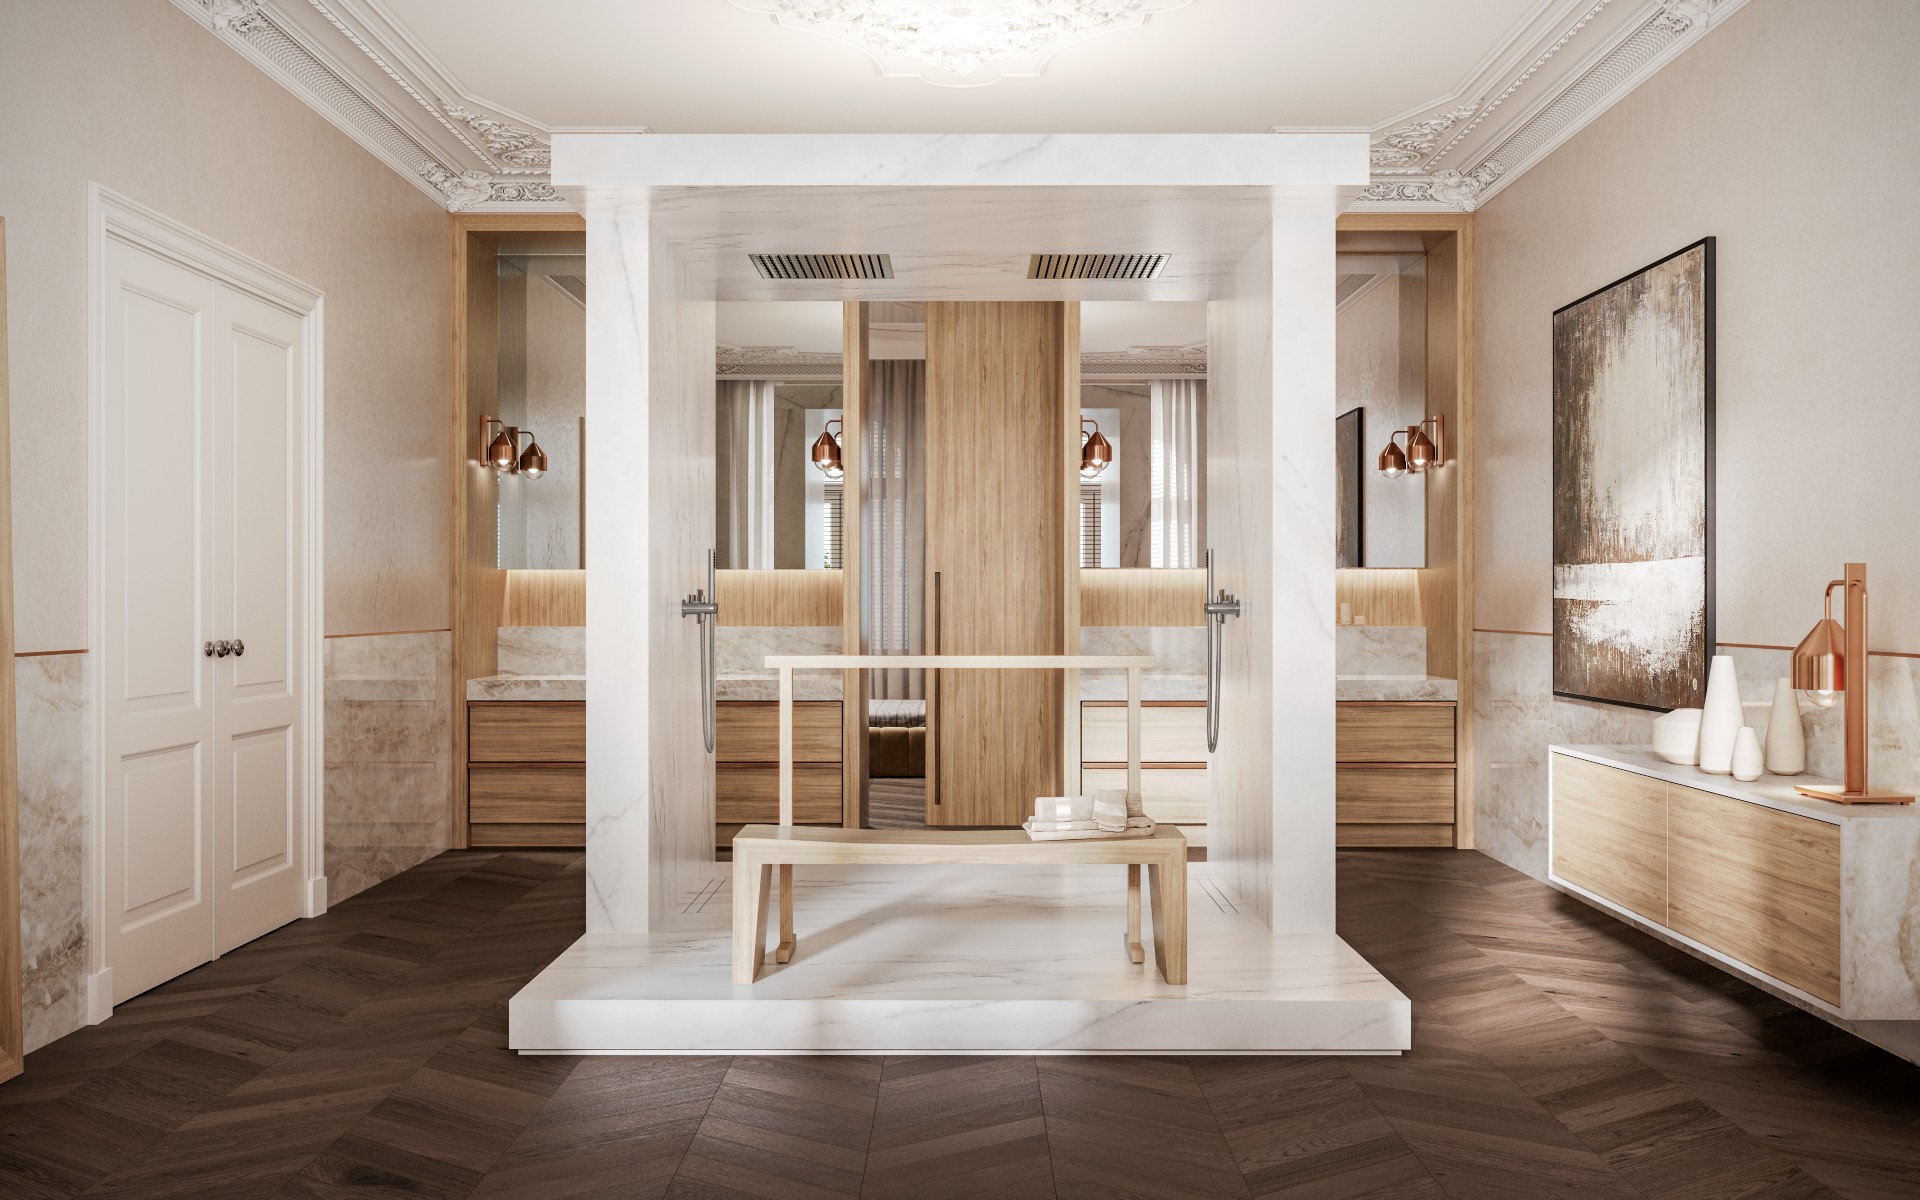 Image of THE PALAZZO IMÁGEN GENERAL in Ananda: Claudia Afshar’s bathroom ode to happiness  - Cosentino